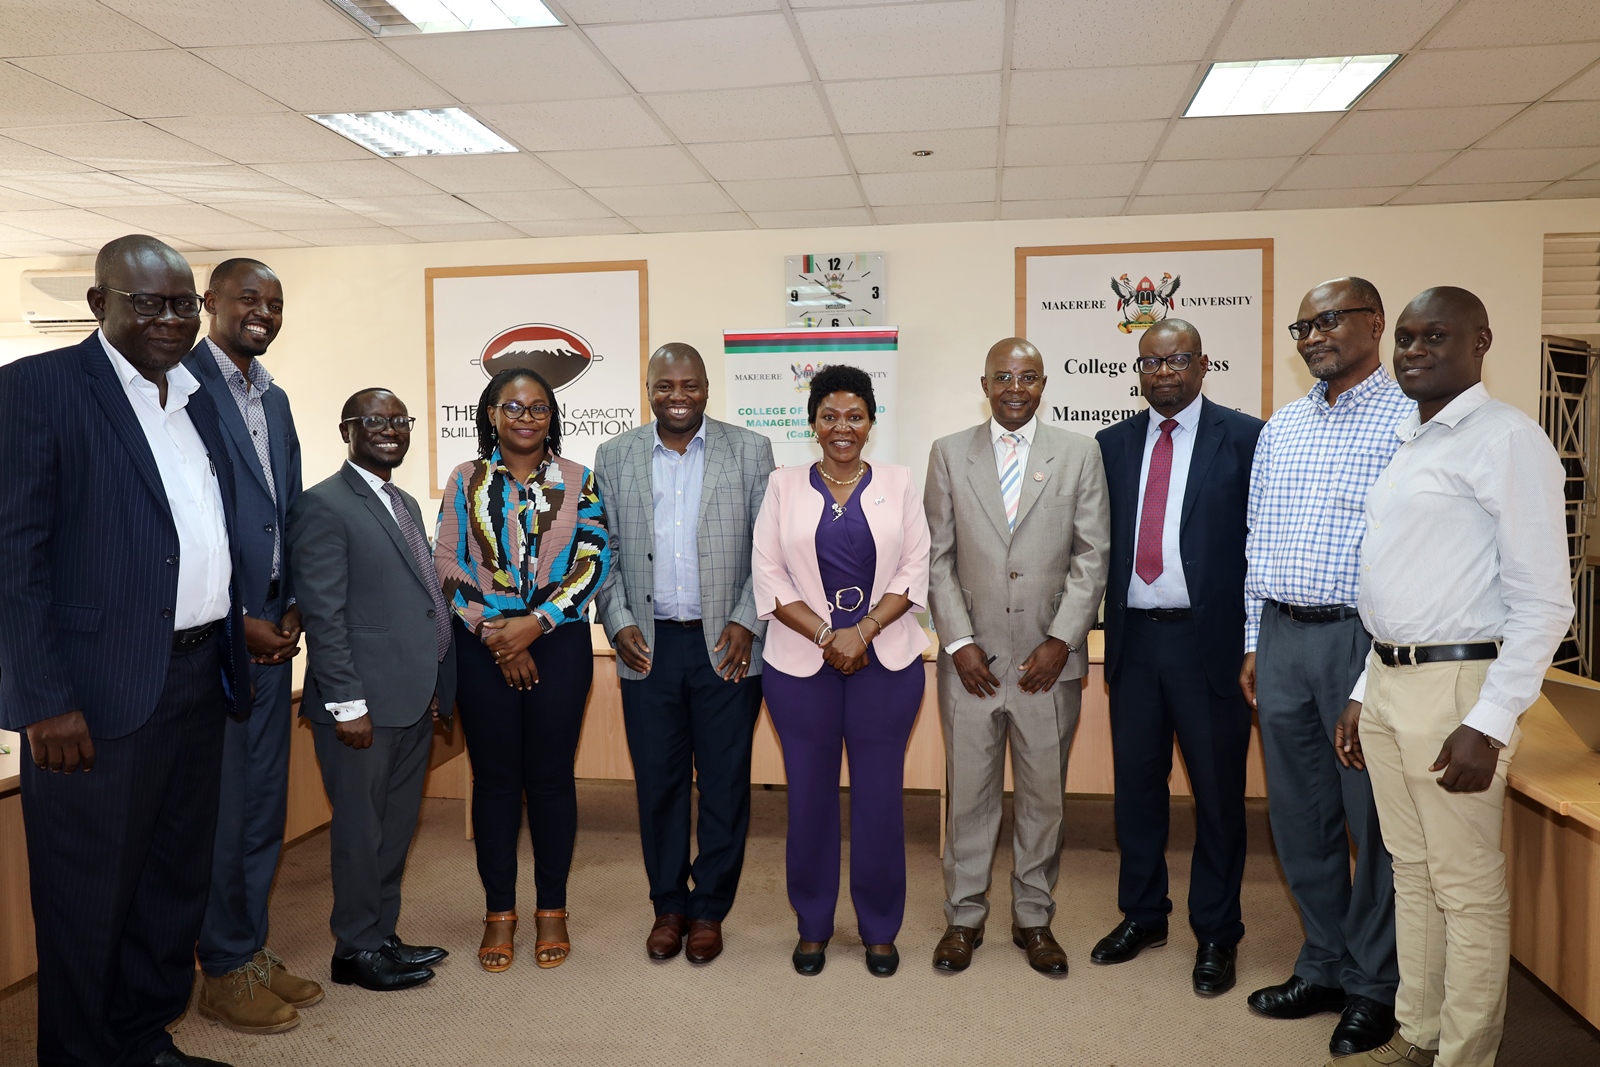 Prof. Godfrey Akileng (L), Ms. Fiona Luswata from UNCDF (4th L), Dr. Eric Nzibonera (5th L), Ms. Jennifer Bukokhe (5th R), Prof. Edward Bbaale (4th R), Dr. Mkhululi from UNCDF (3rd R), Prof. Bruno Yawe (2nd R) and other officials at the meeting. Visit by officials from the United Nations Capital Development Fund (UNCDF) to the College of Business and Management Sciences (CoBAMS) to bolster their longstanding partnership, 18th June 2024, Conference Room, Room 2.2B, Level 2, School of Business, College of Business and Management Sciences (CoBAMS), Makerere University, Kampala Uganda, East Africa.